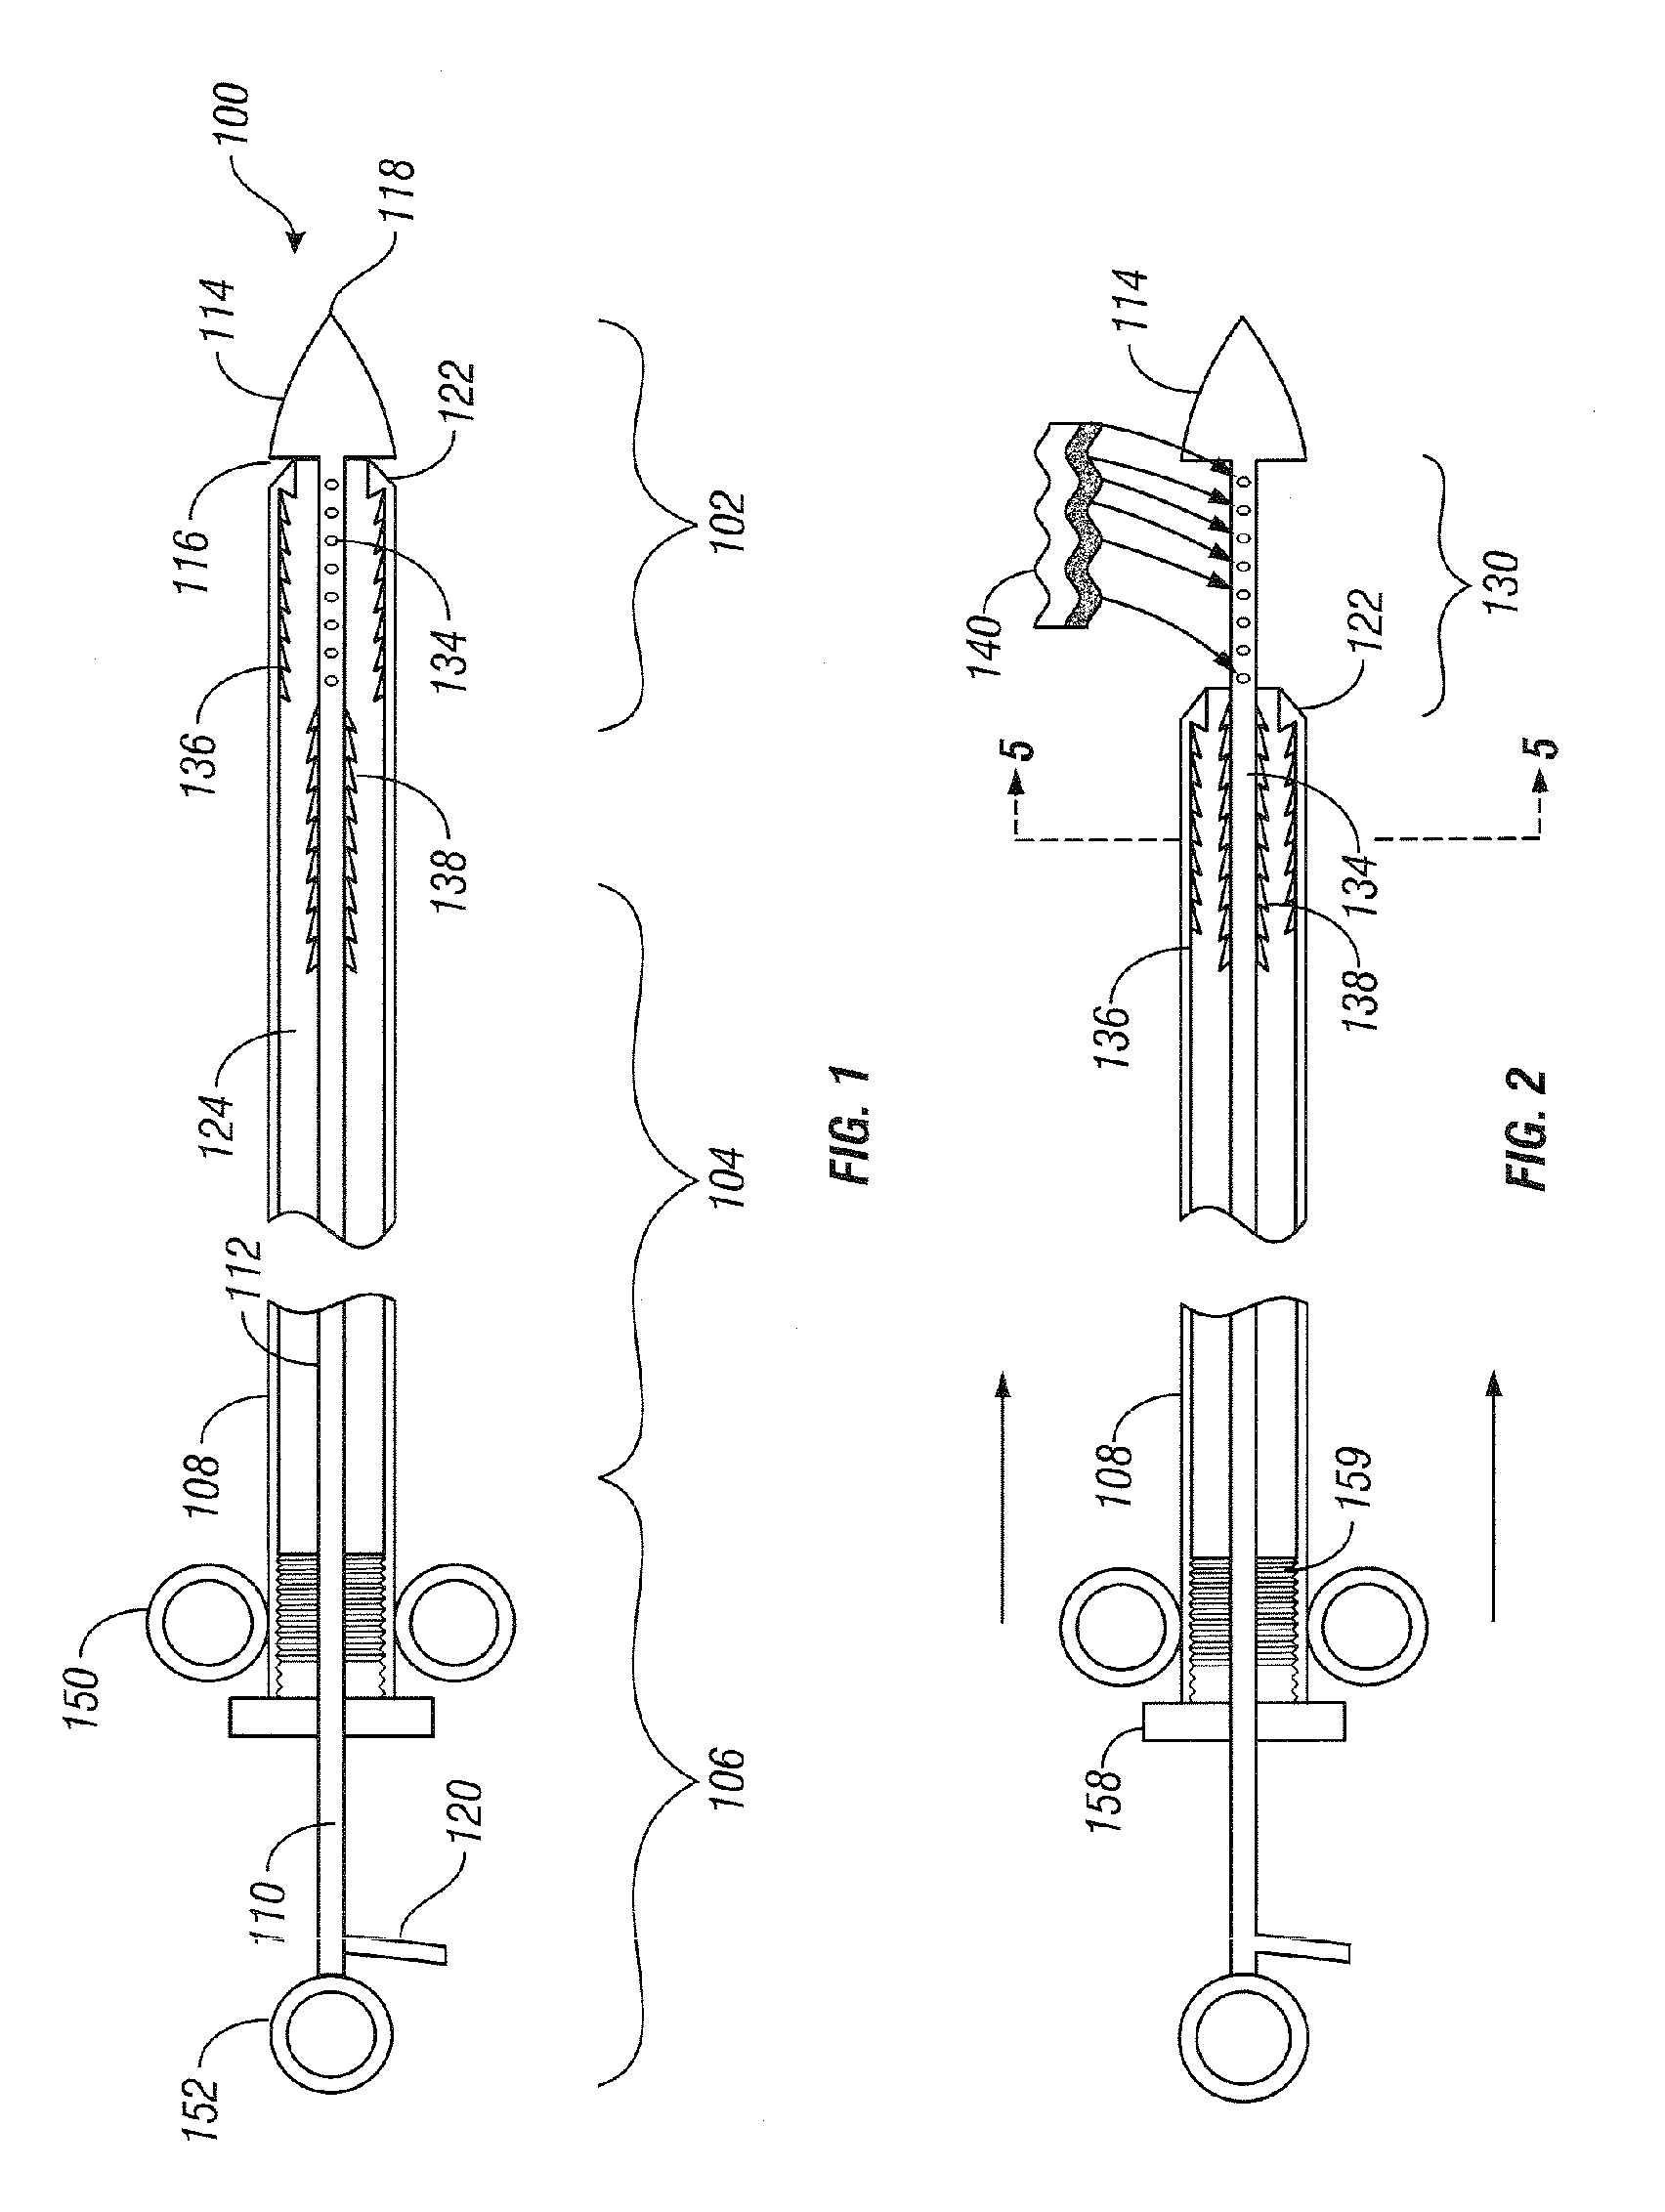 Multiple biopsy collection device